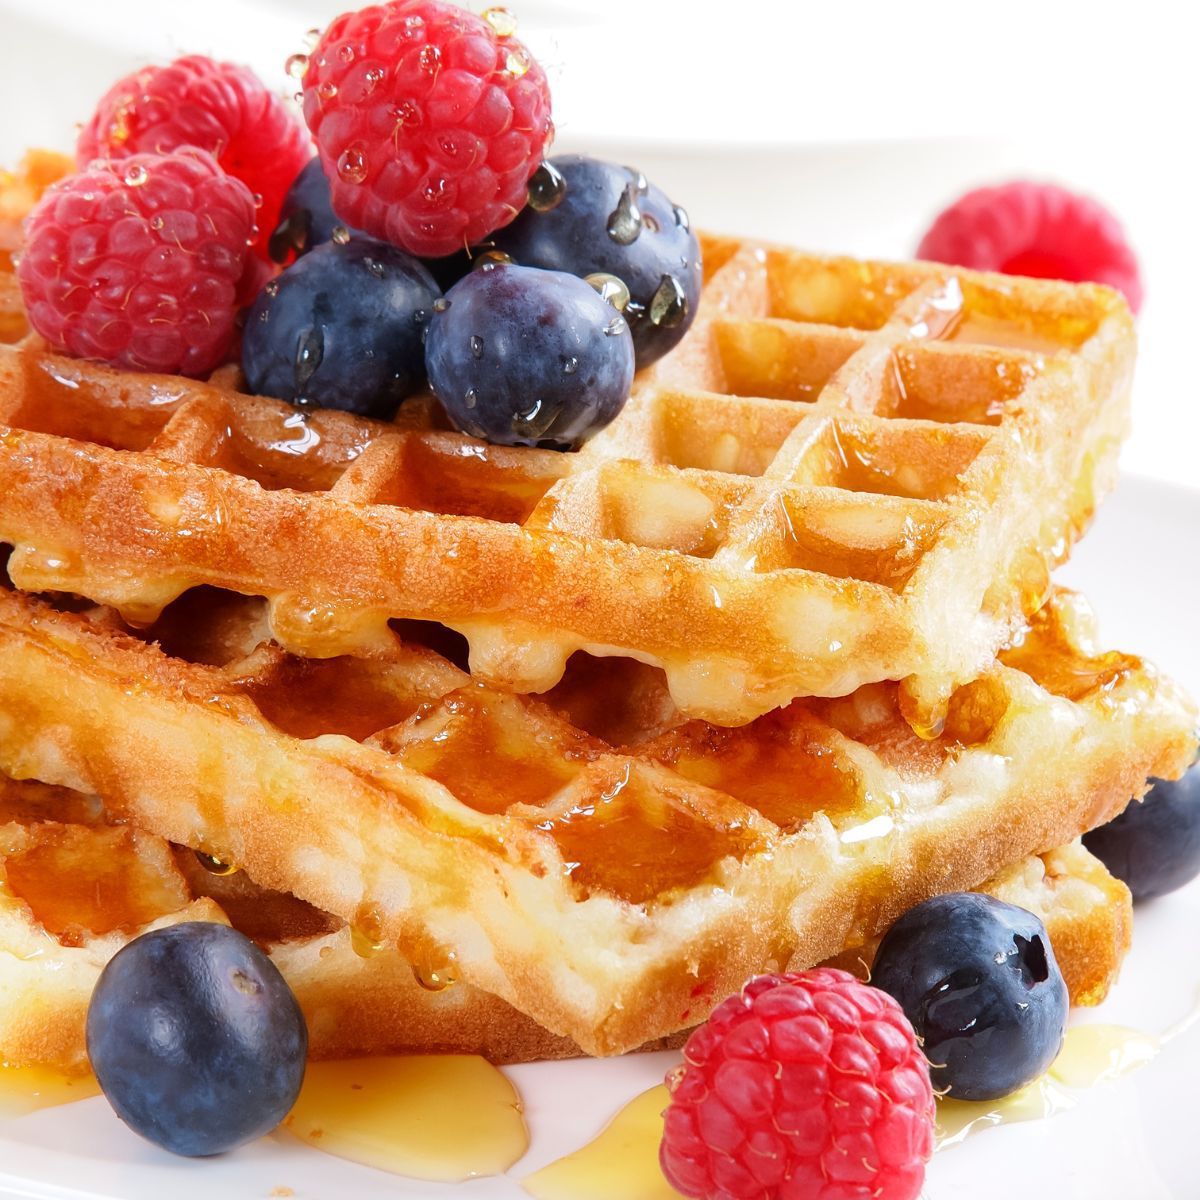 Square image showing waffles with fruit and syrup.